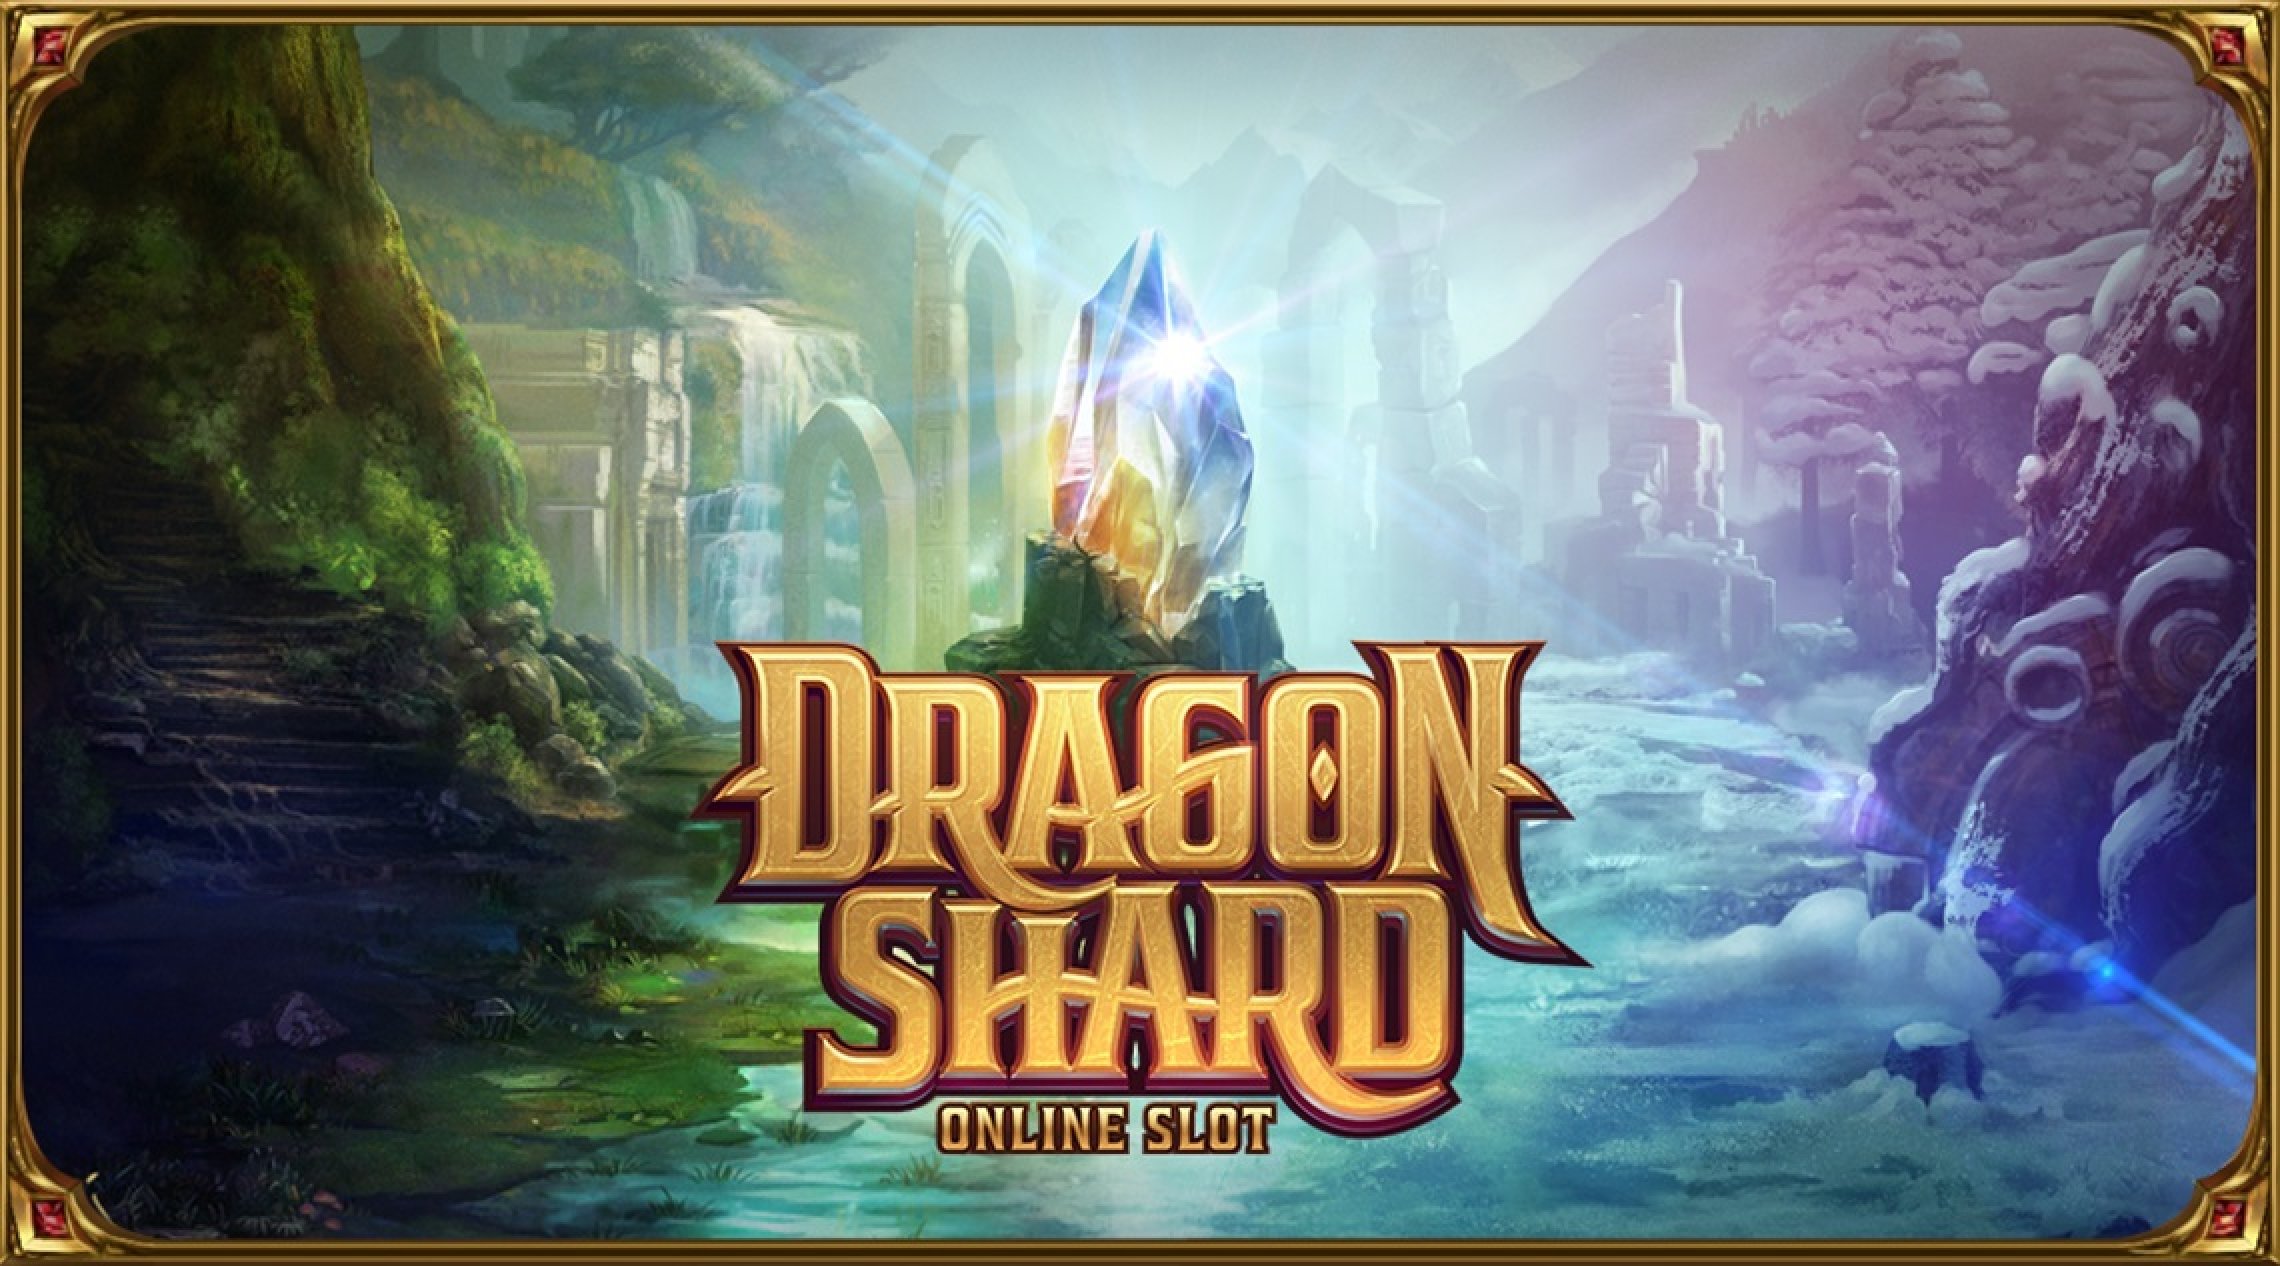 The Dragon Shard Online Slot Demo Game by Stormcraft Studios